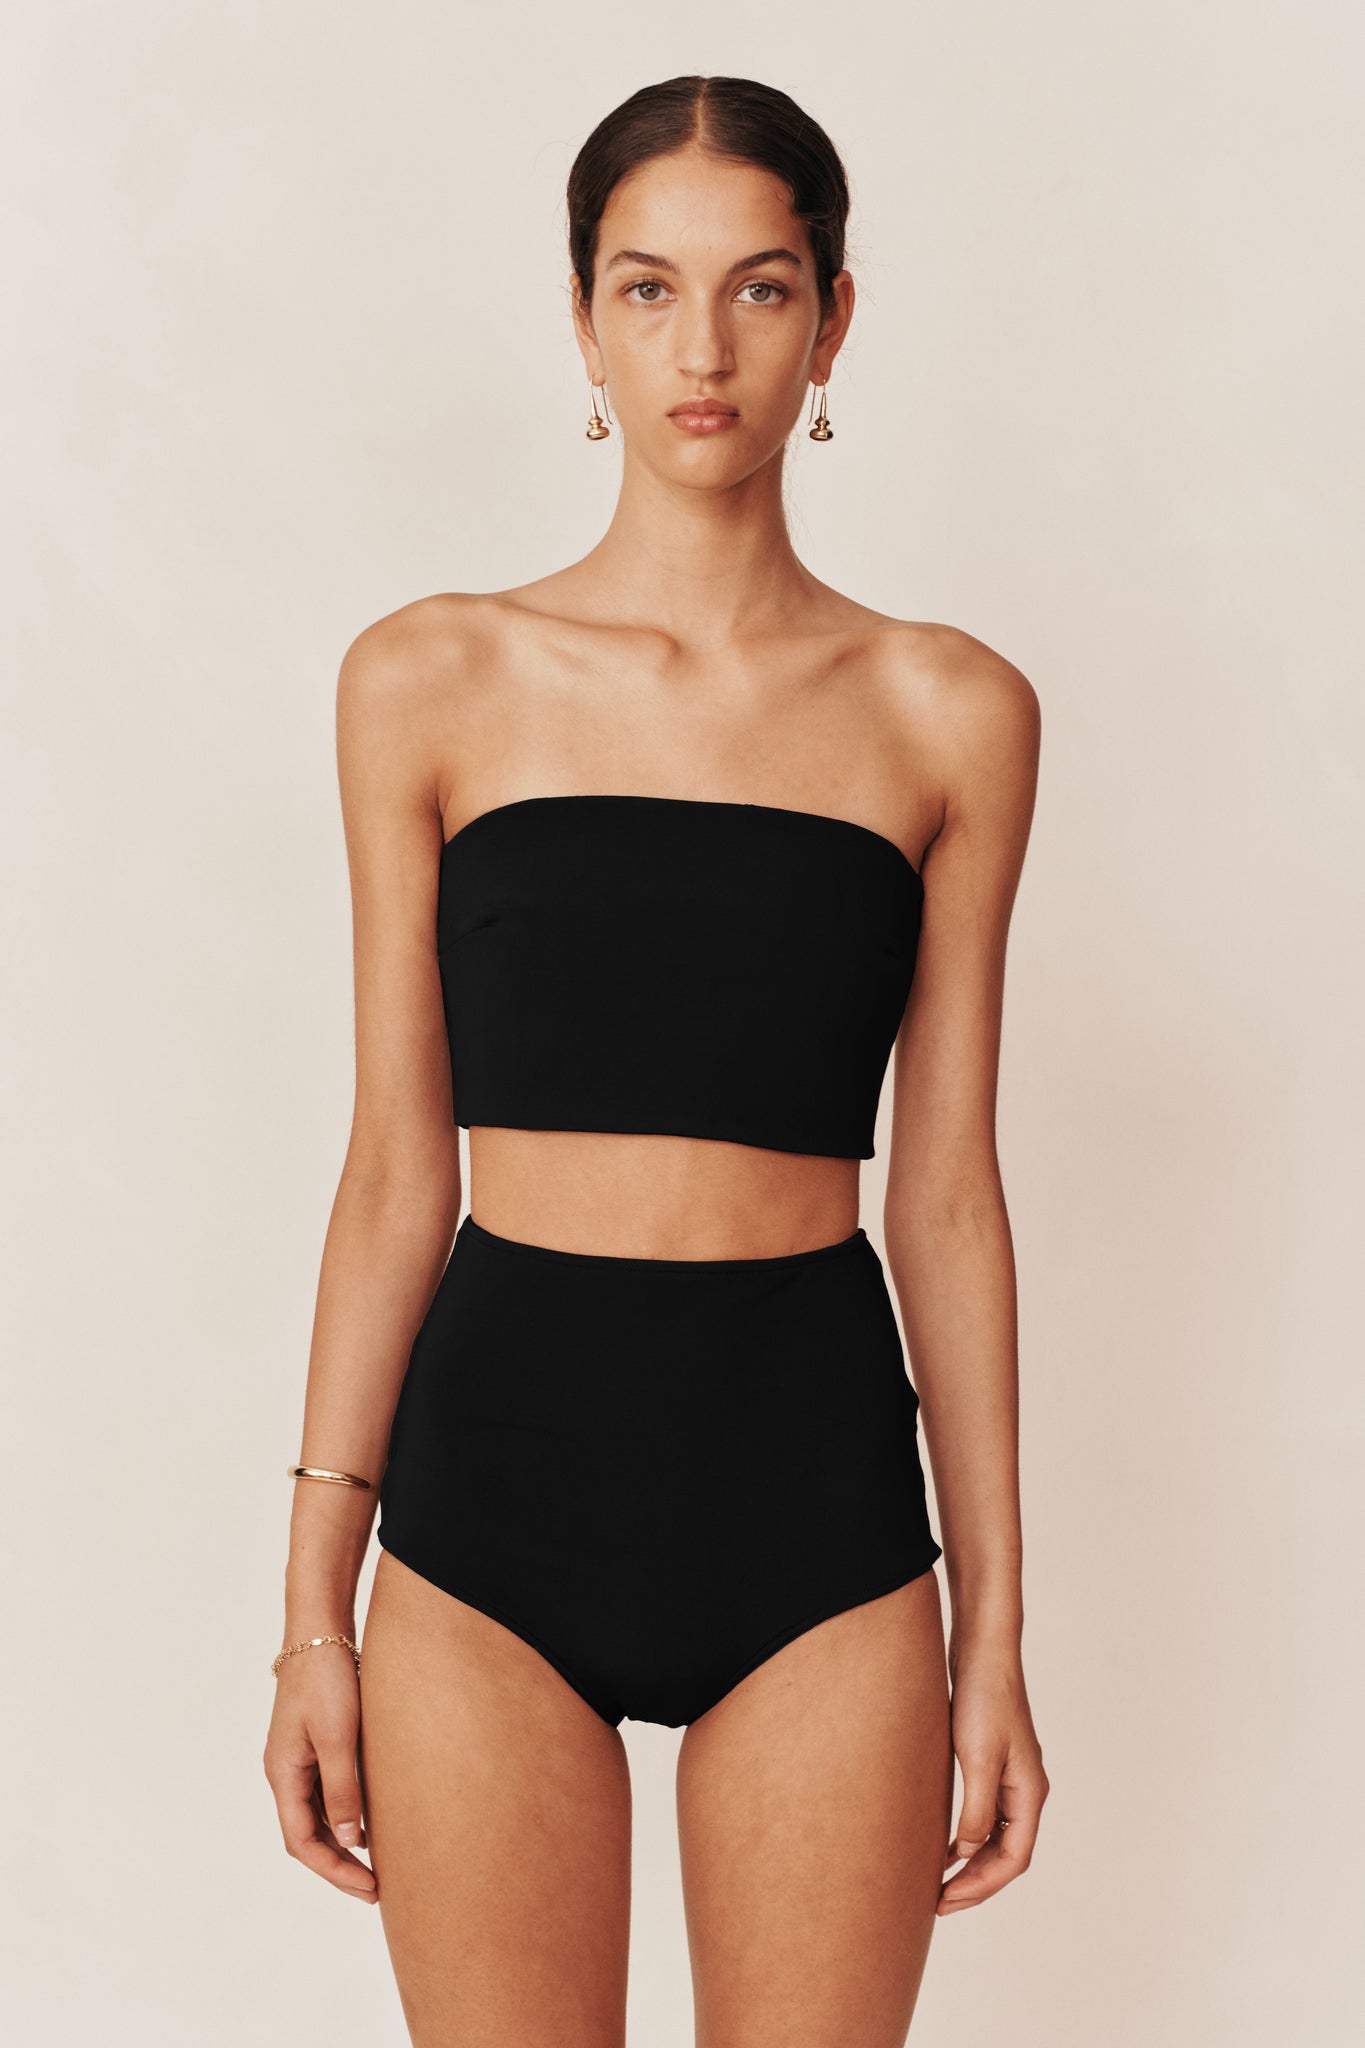 Esse Knit High Waisted Brief in Black available at TNT The New Trend Australia.